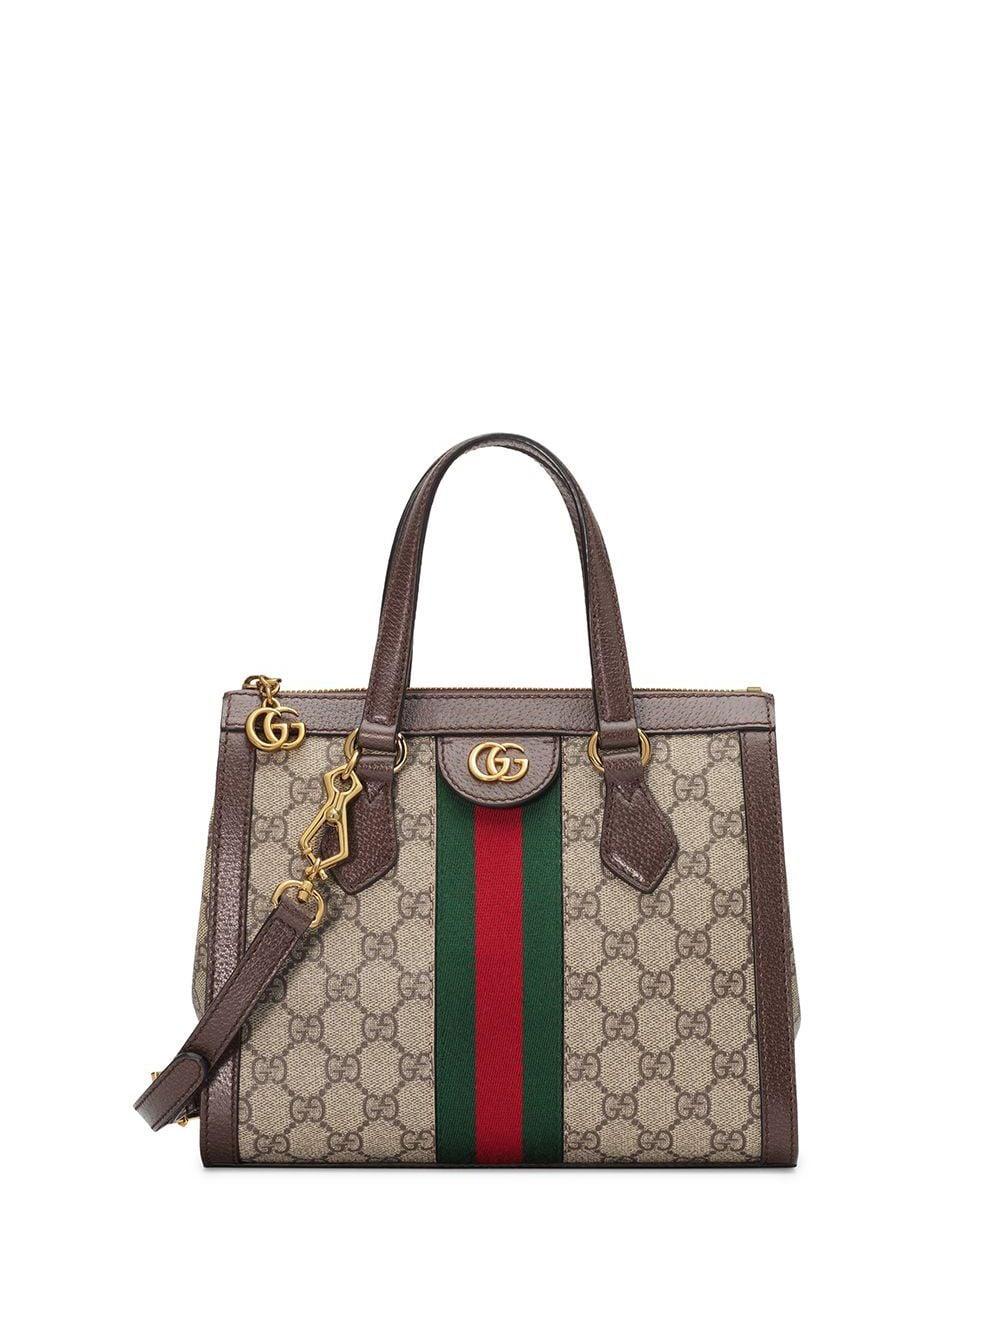 Gucci Ophidia Gg Medium Tote Bag in Green | Lyst